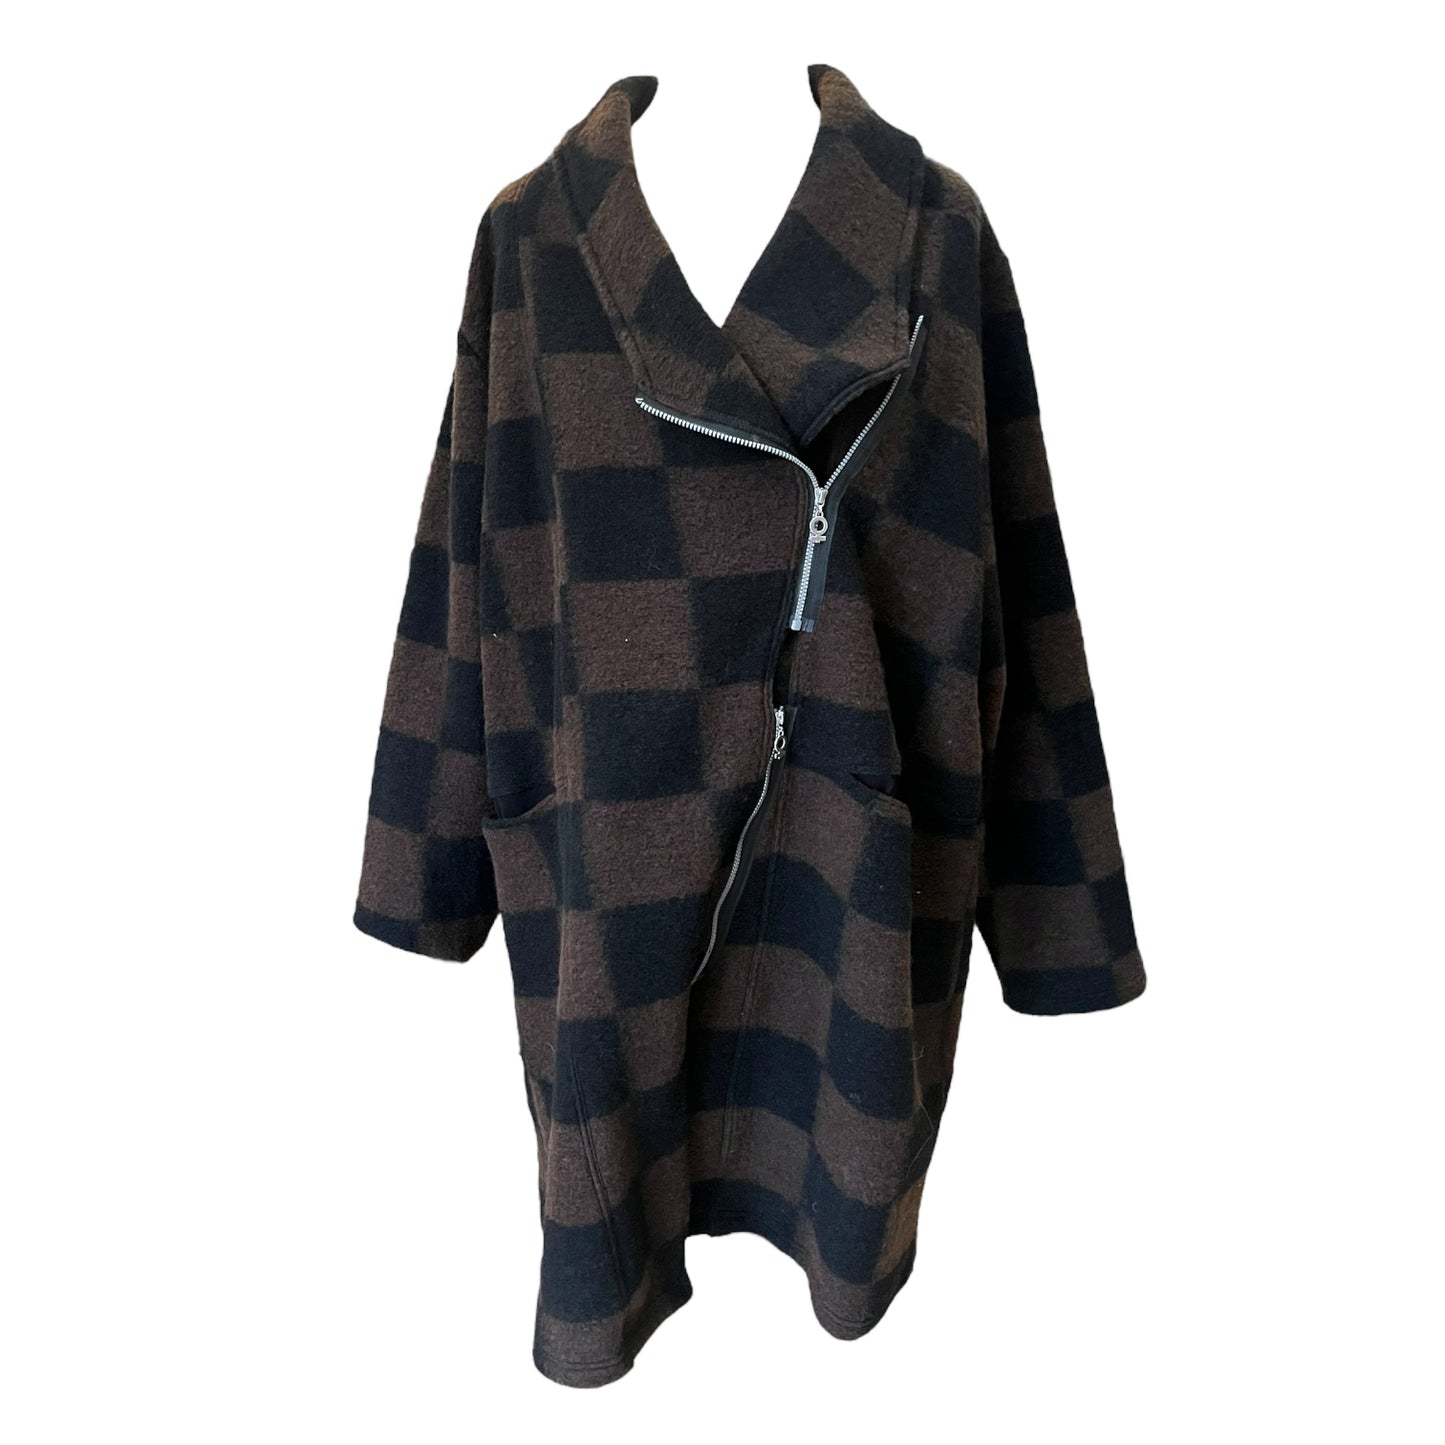 NEW My Soul Brown and Black Check Coat